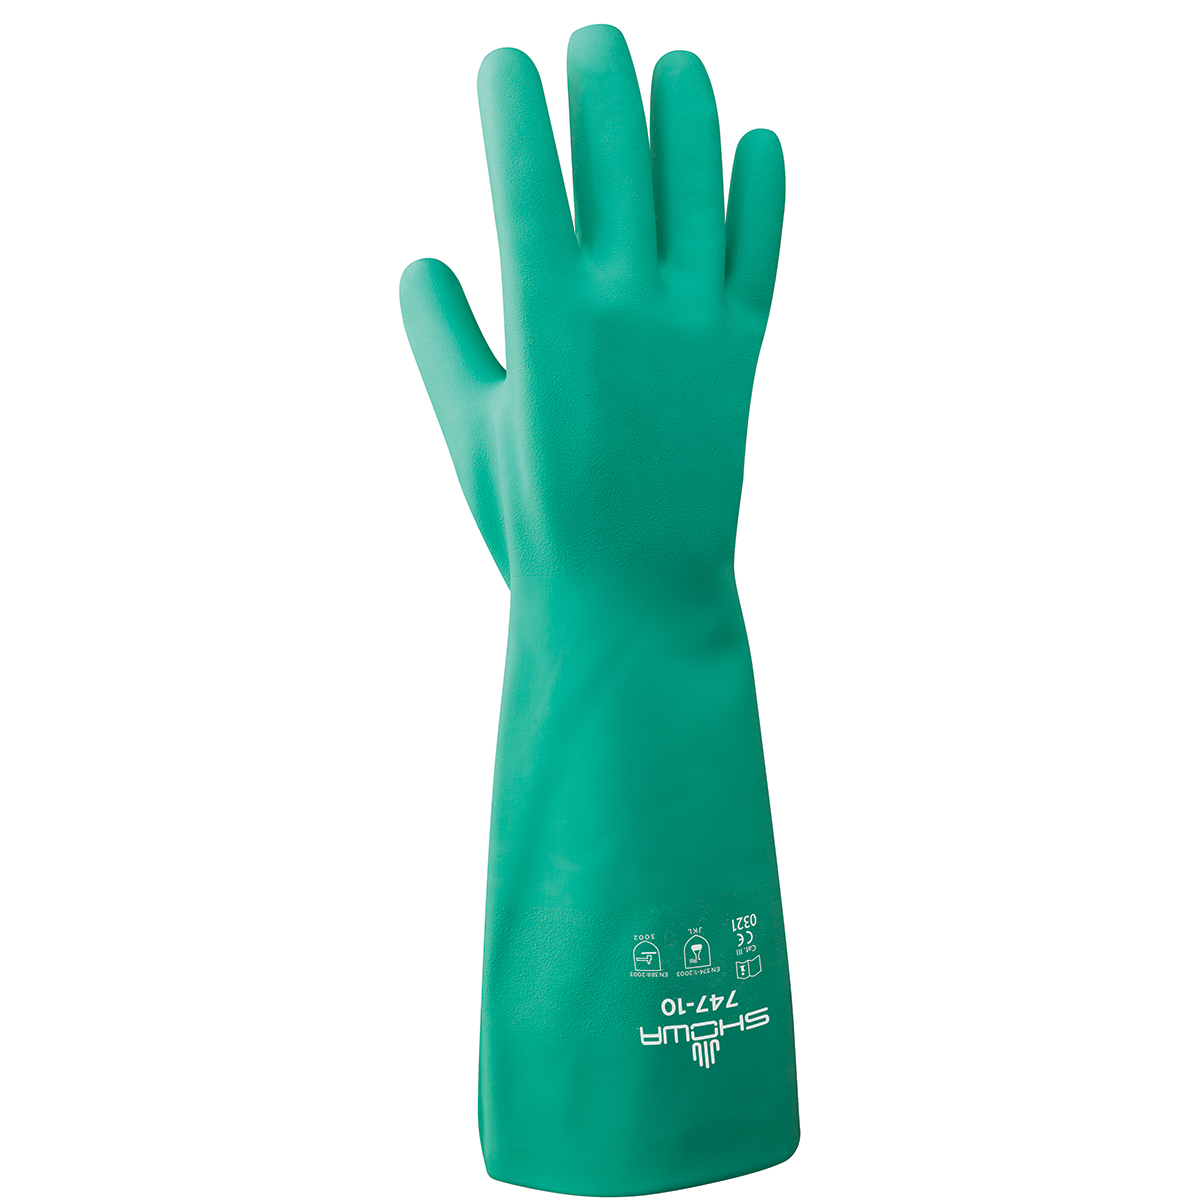 Chemical resistant unsupported nitrile, 19", 22-mil, light green, bisque finish, unlined, large